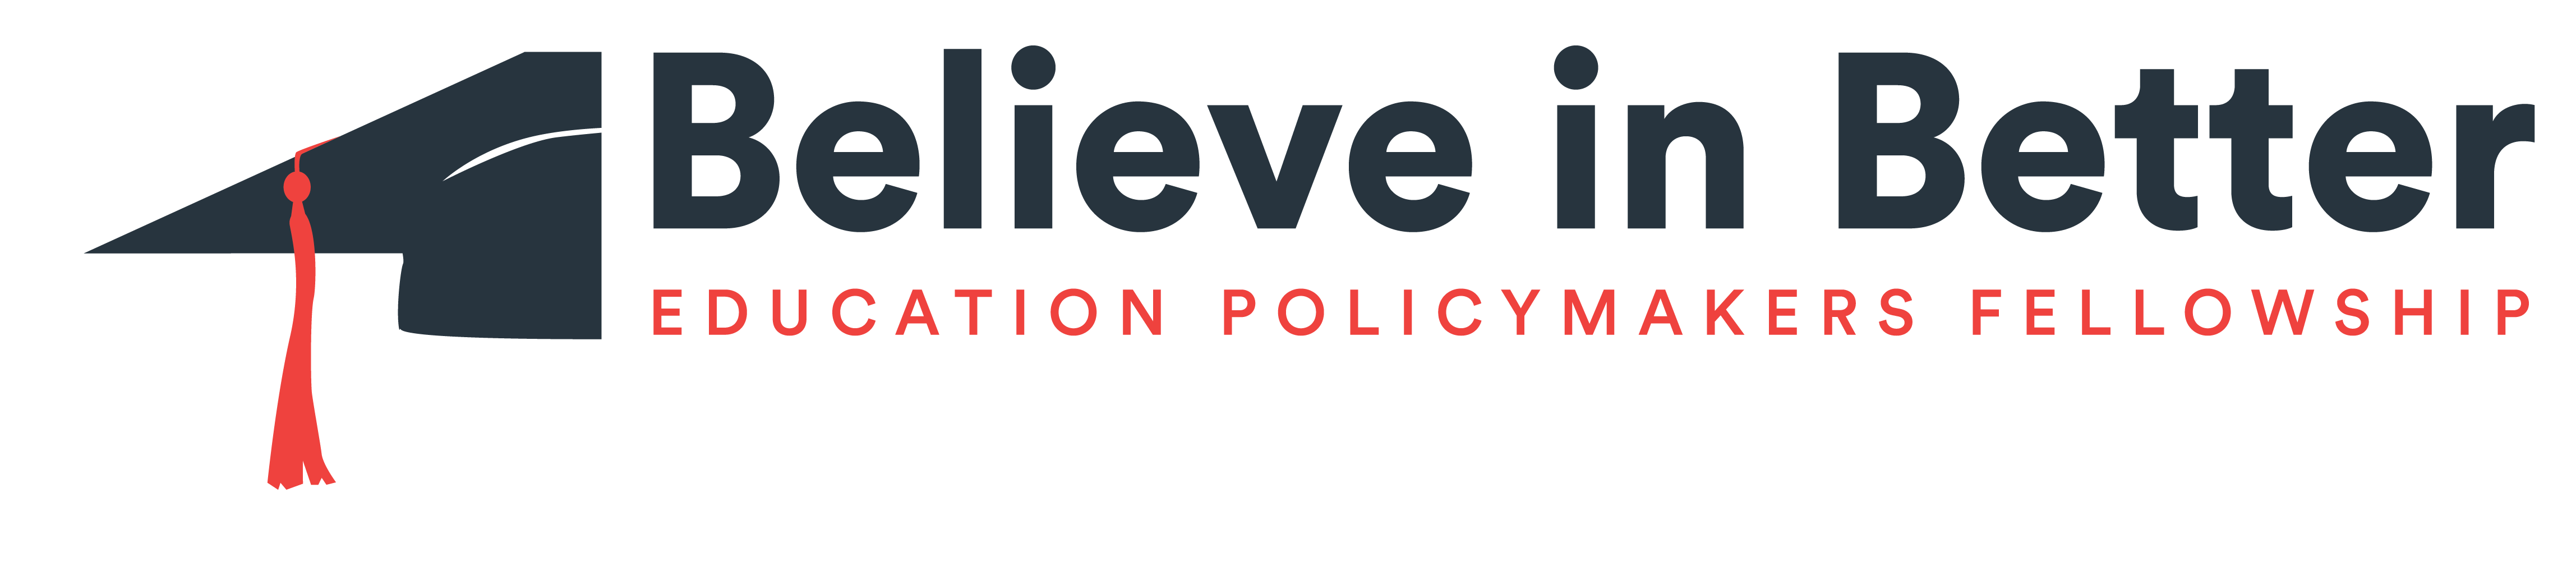 50CAN Action Fund's Believe in Better Education Policymakers Fellowship